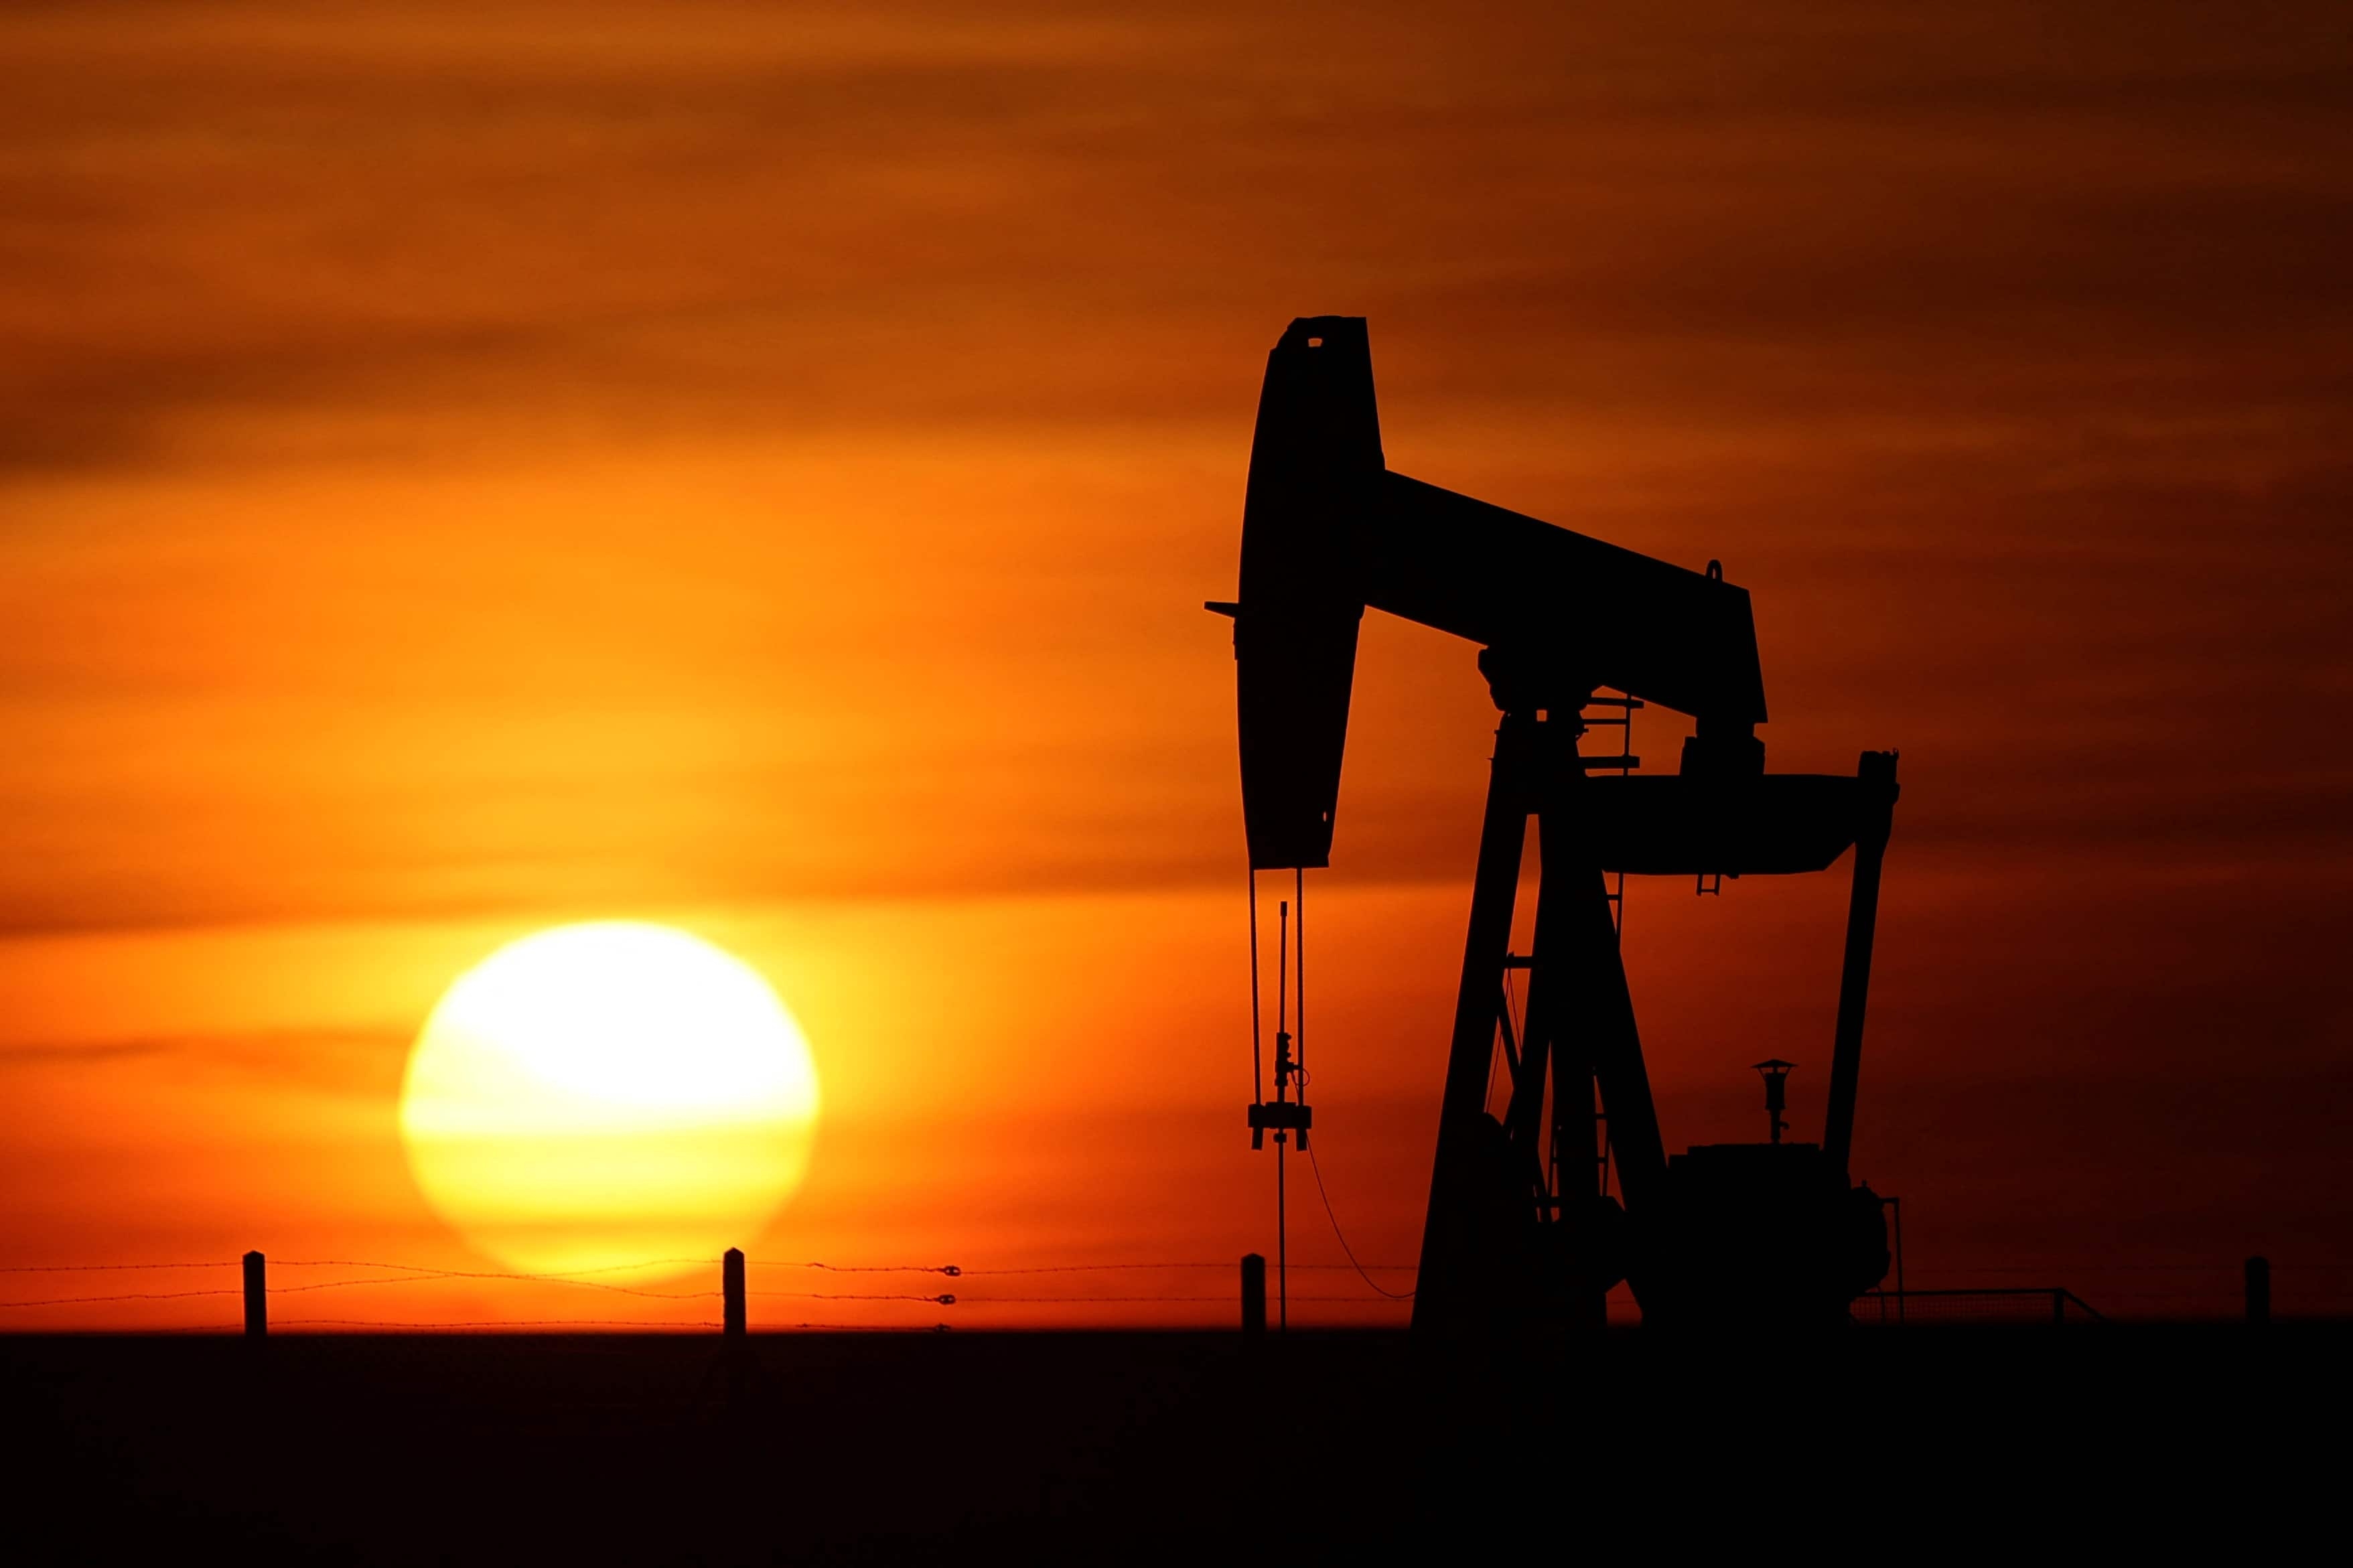 Global oil prices fell on Wednesday by the most in nearly two years after OPEC member United Arab Emirates said it supported pumping more oil into a market roiled by supply disruptions due to sanctions on Russia after it invaded Ukraine. Brent crude futures settled down $16.84, or 13.2 percent, at $111.14 a barrel, their biggest one-day decline since April 21, 2020. The US crude futures ended down $15.44, or 12.5 percent, at $108.70, their biggest daily decline since November.